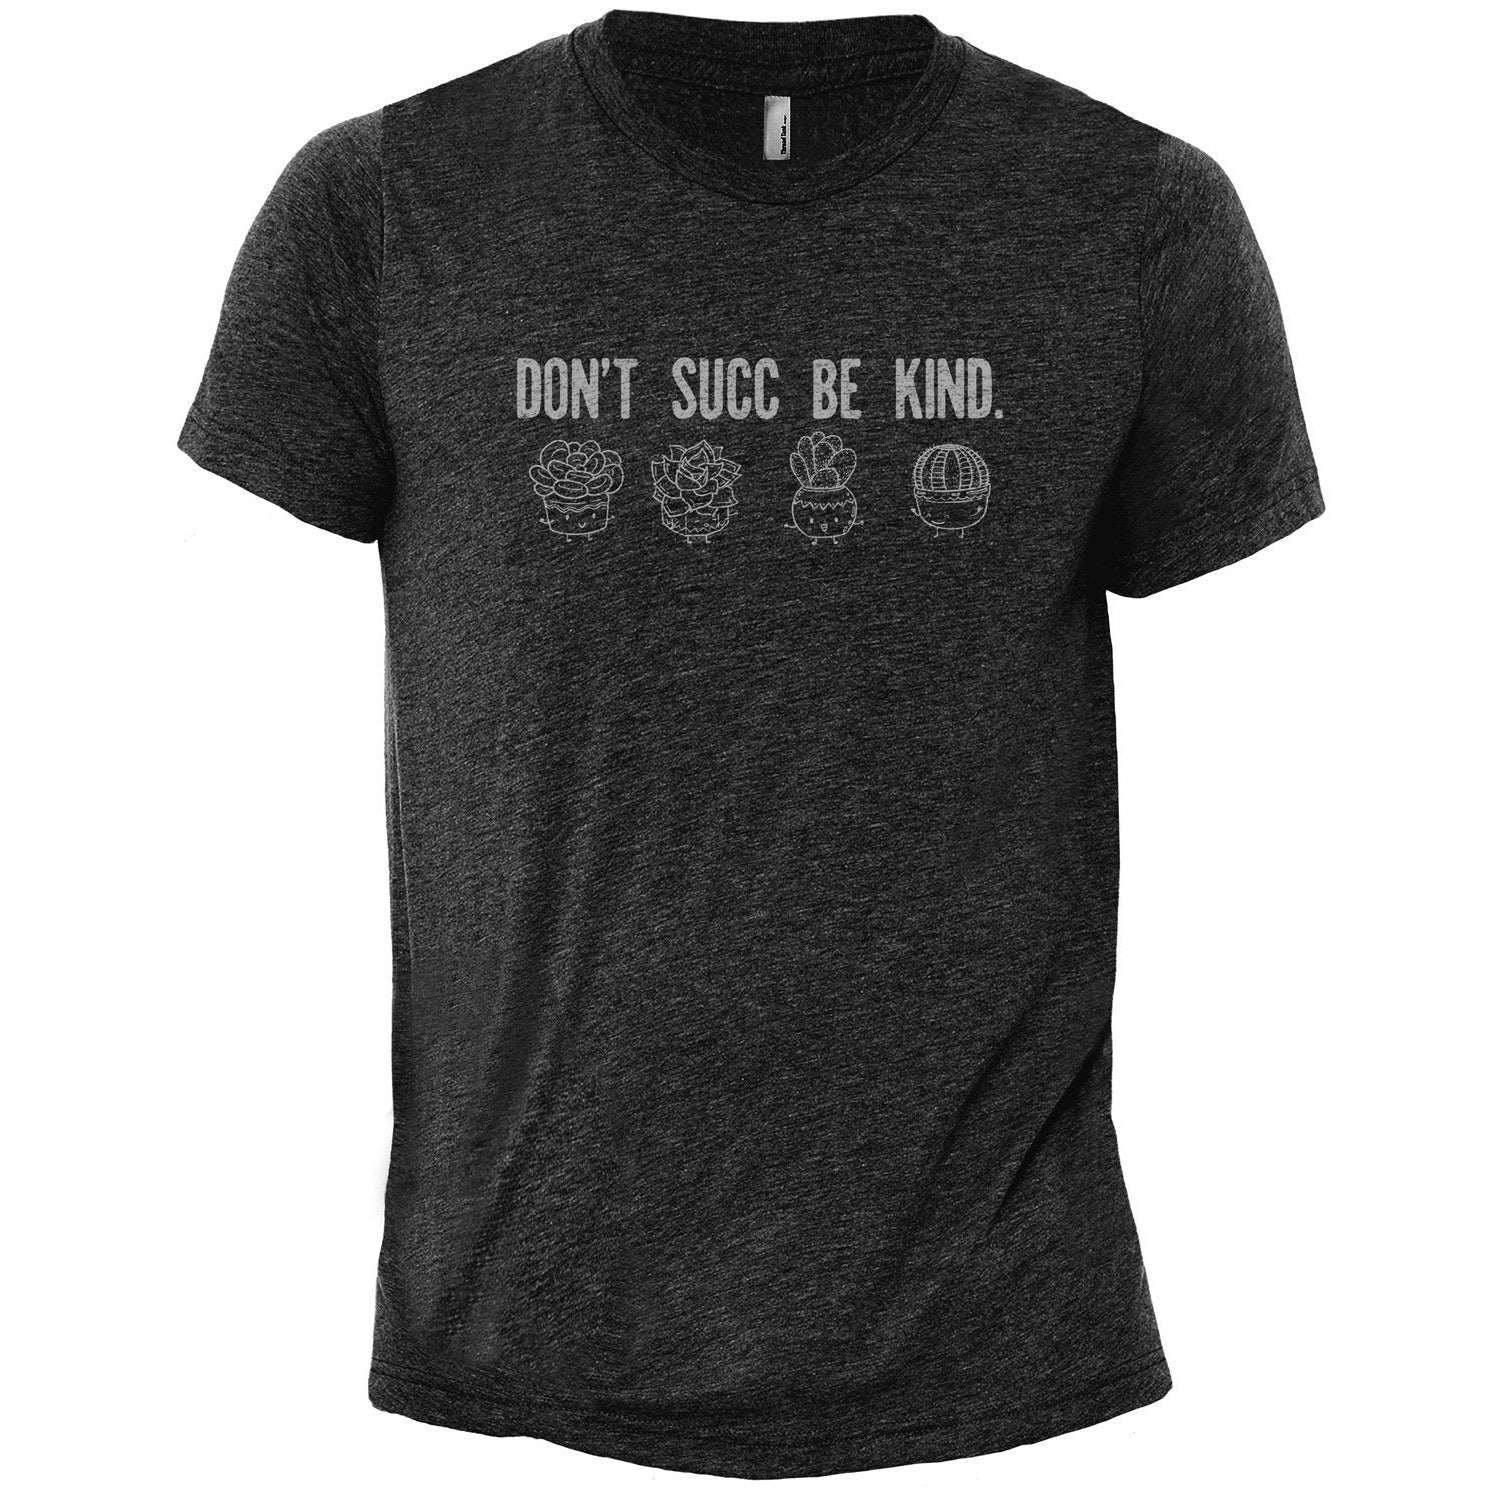 Don't Succ Be Kind Charcoal Printed Graphic Crew T-Shirt Tee